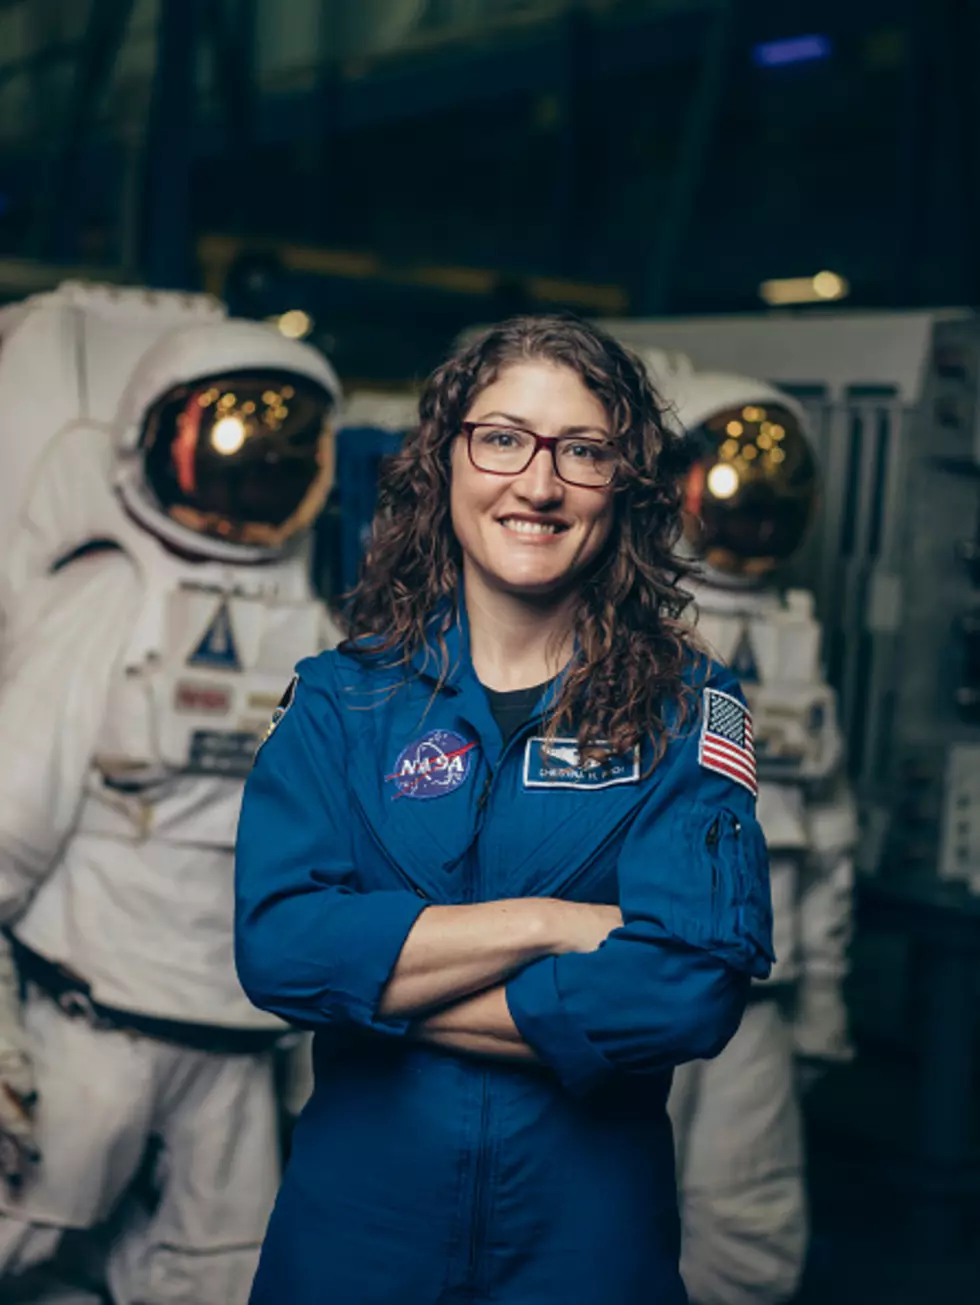 Woman From Grand Rapids to Spend 11 Months in Space